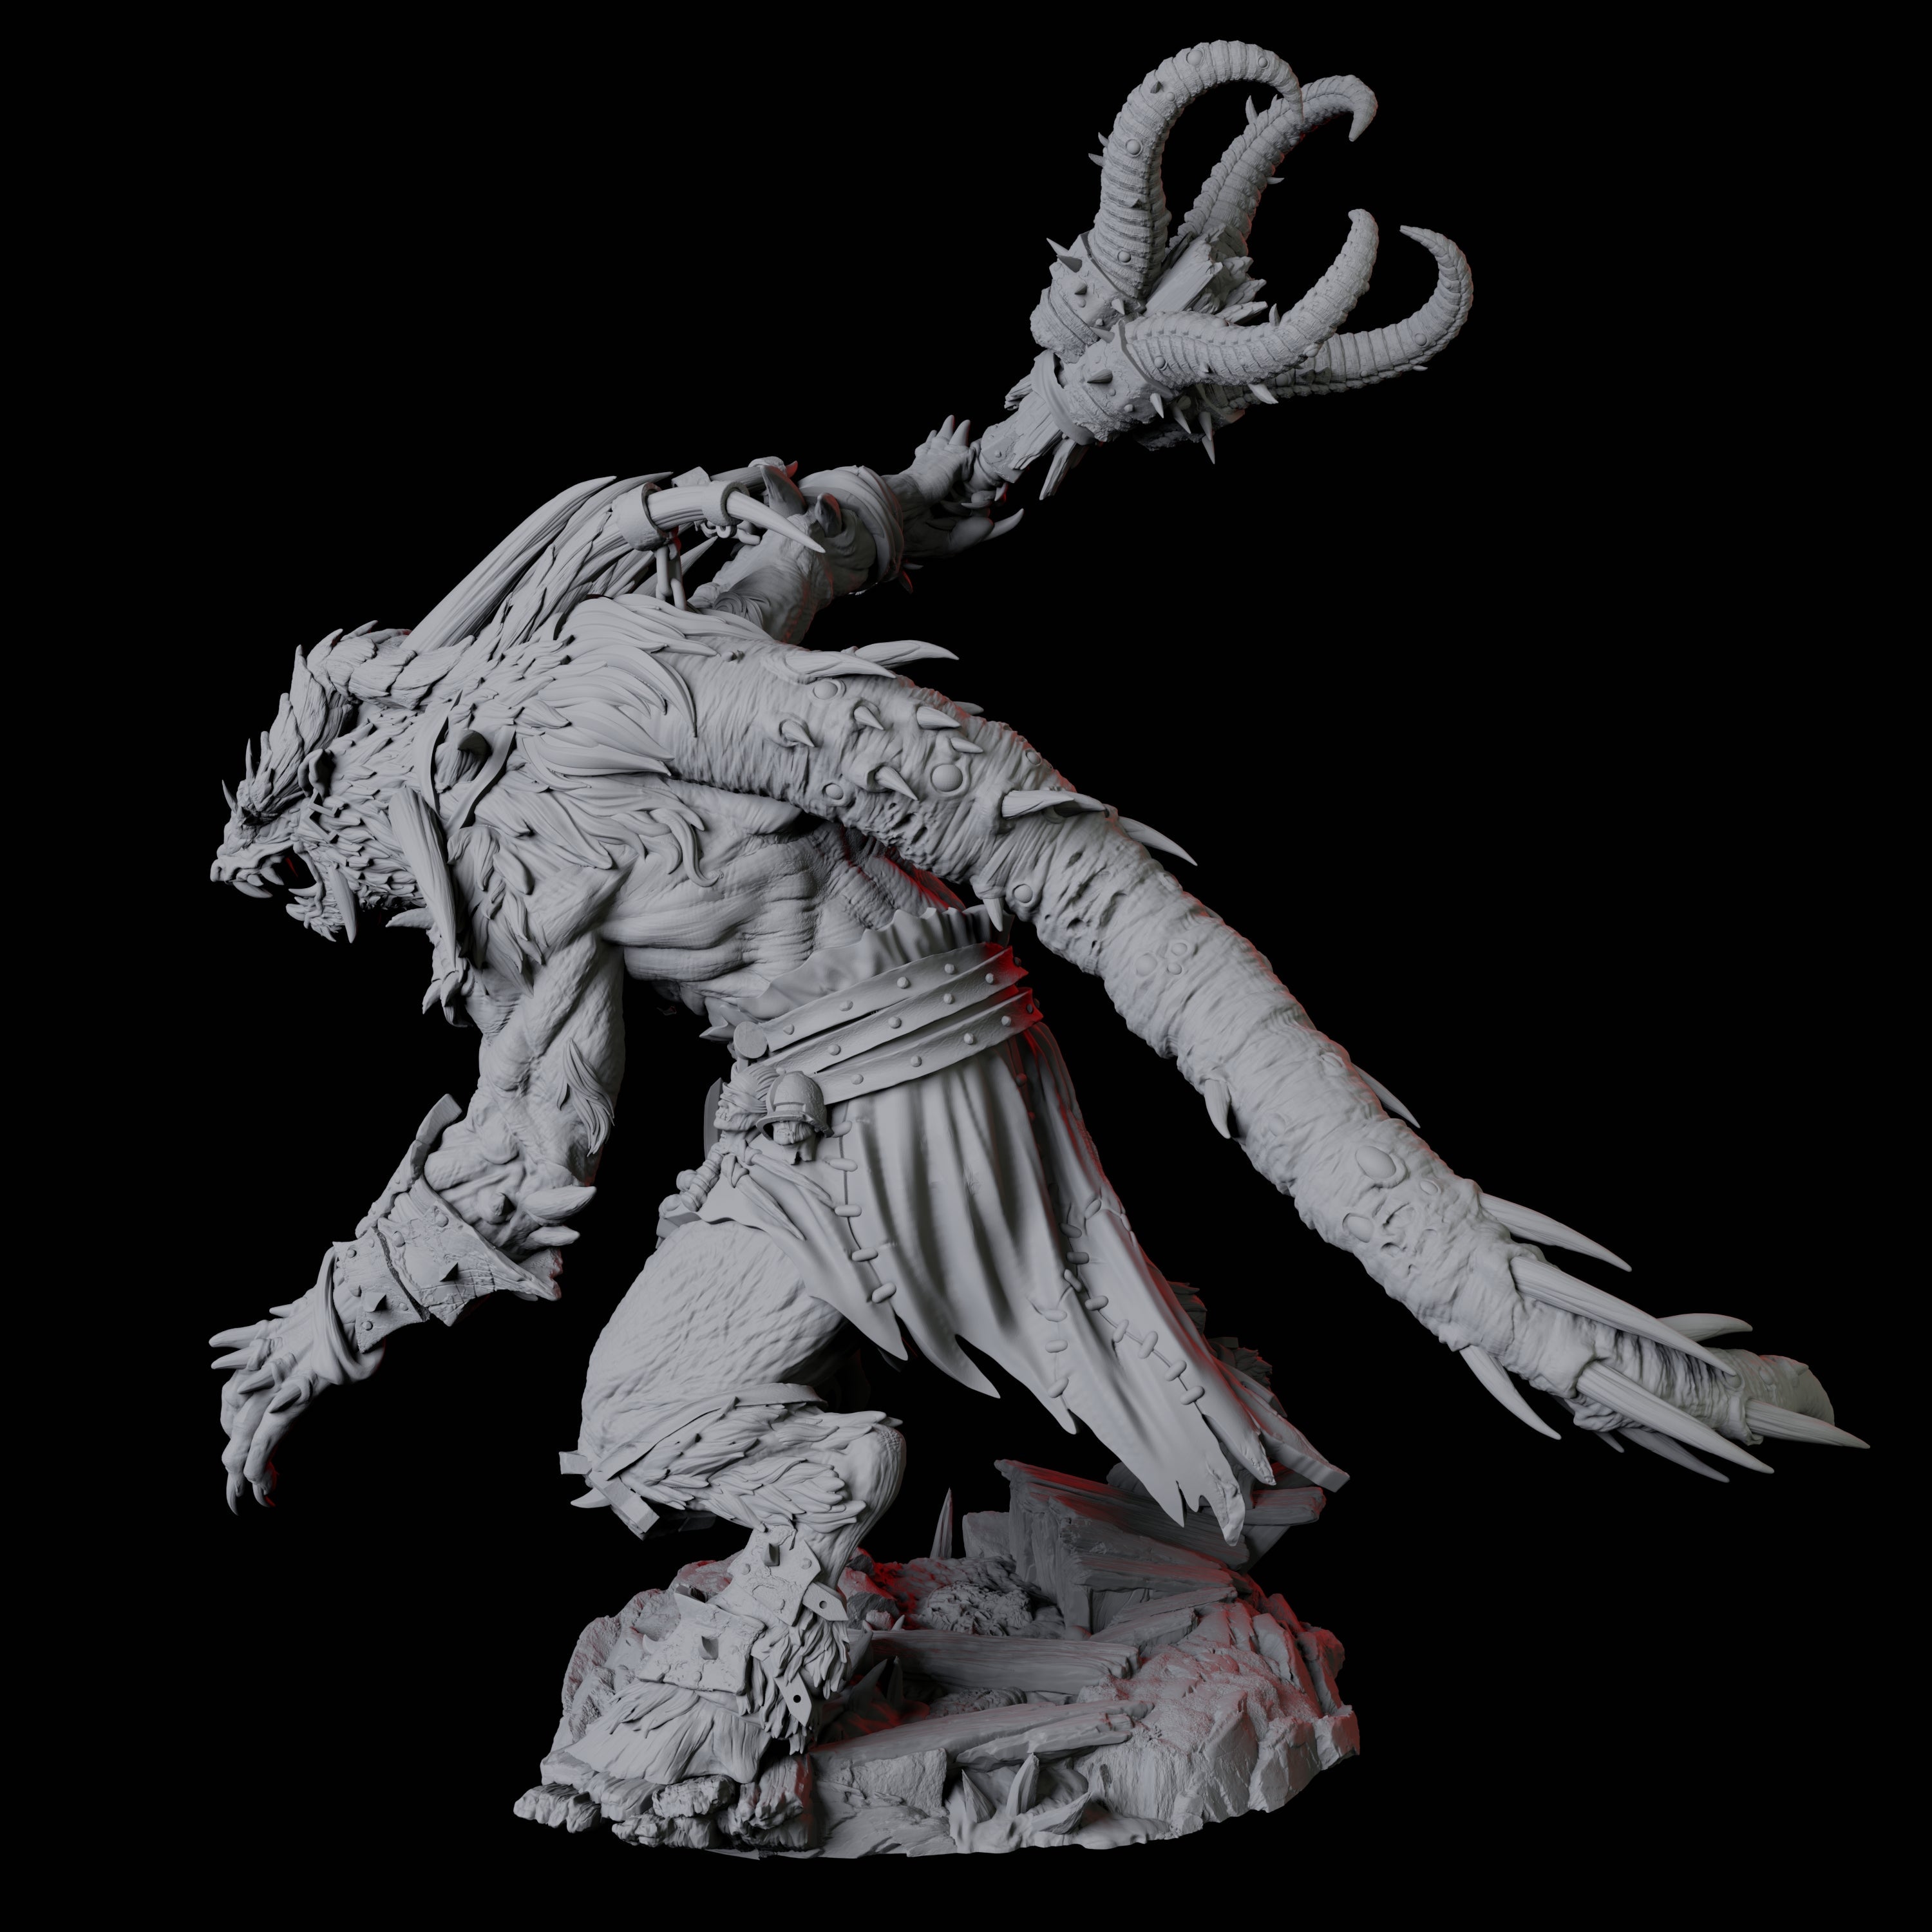 Giant Ratfolk Barbarian C Miniature for Dungeons and Dragons, Pathfinder or other TTRPGs